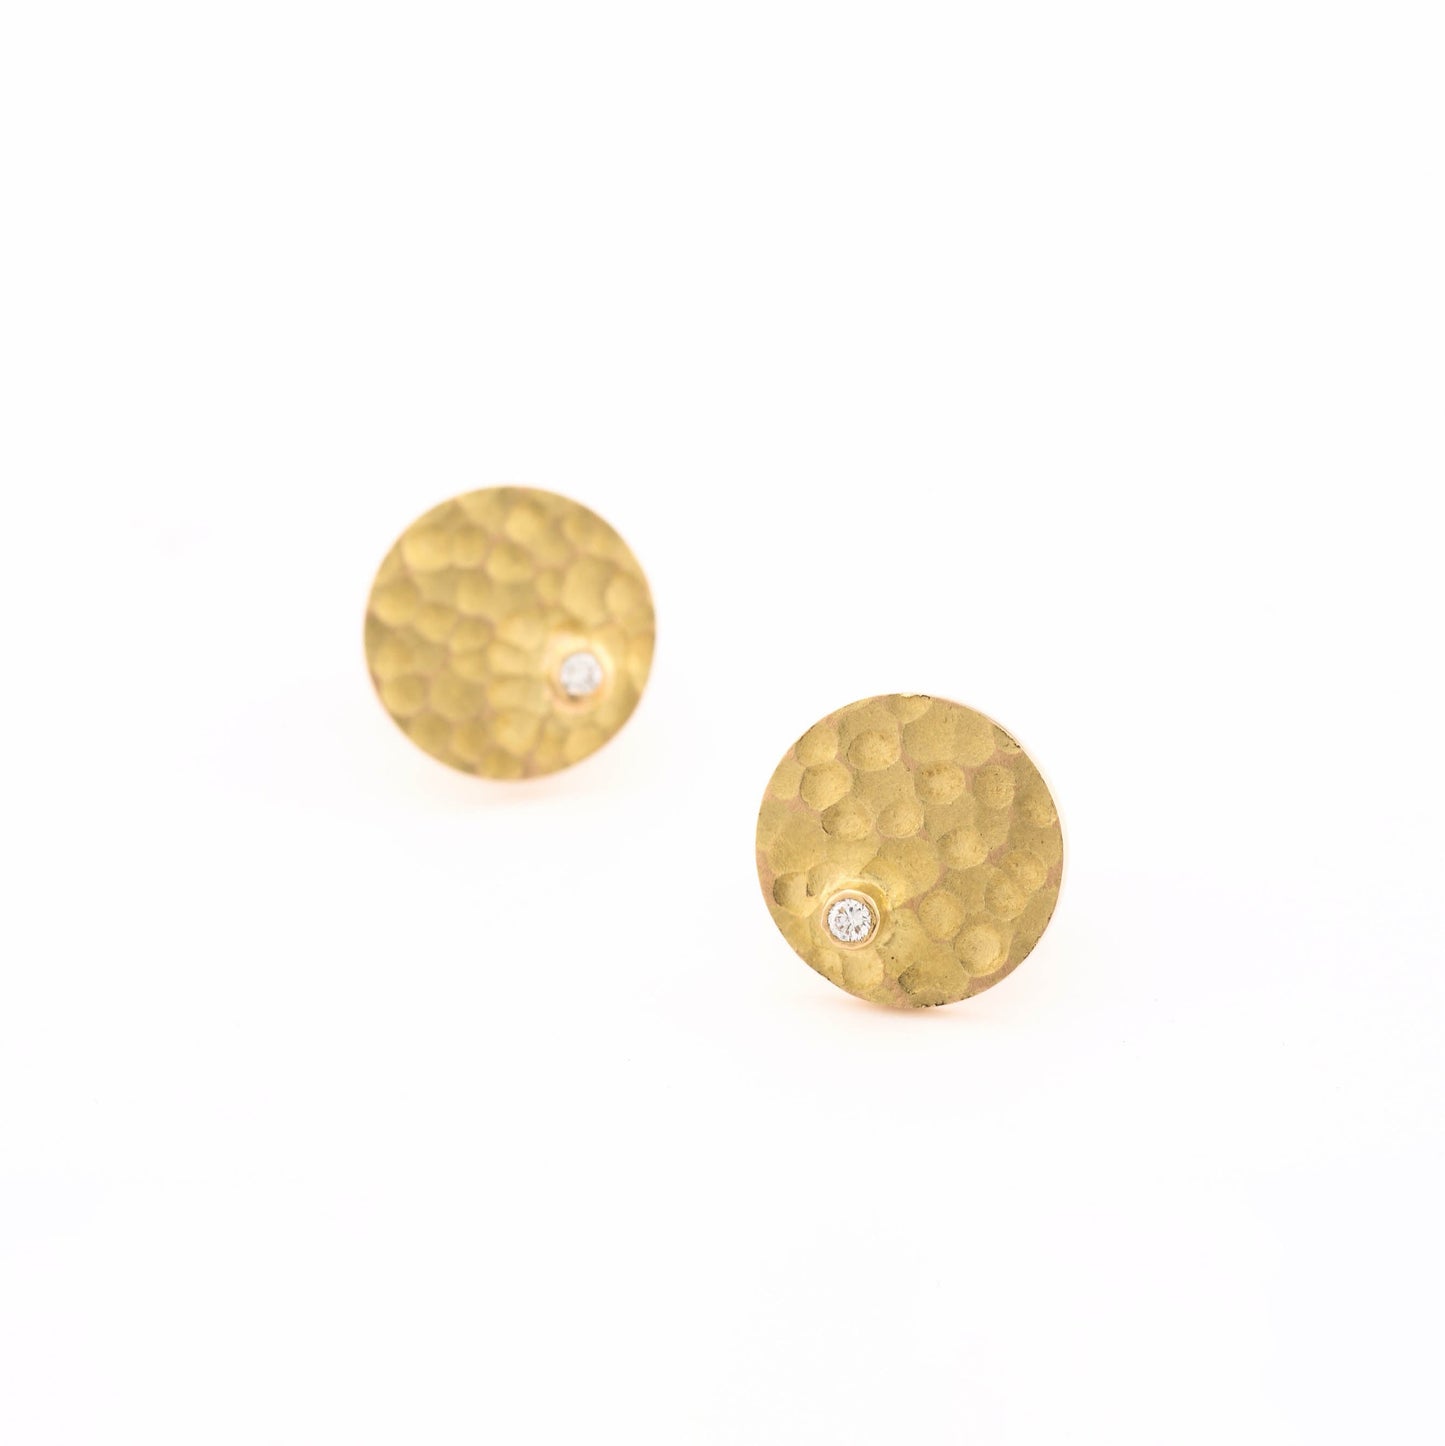 The Parvathi Gold and Diamond Ear Studs by Rasvihar